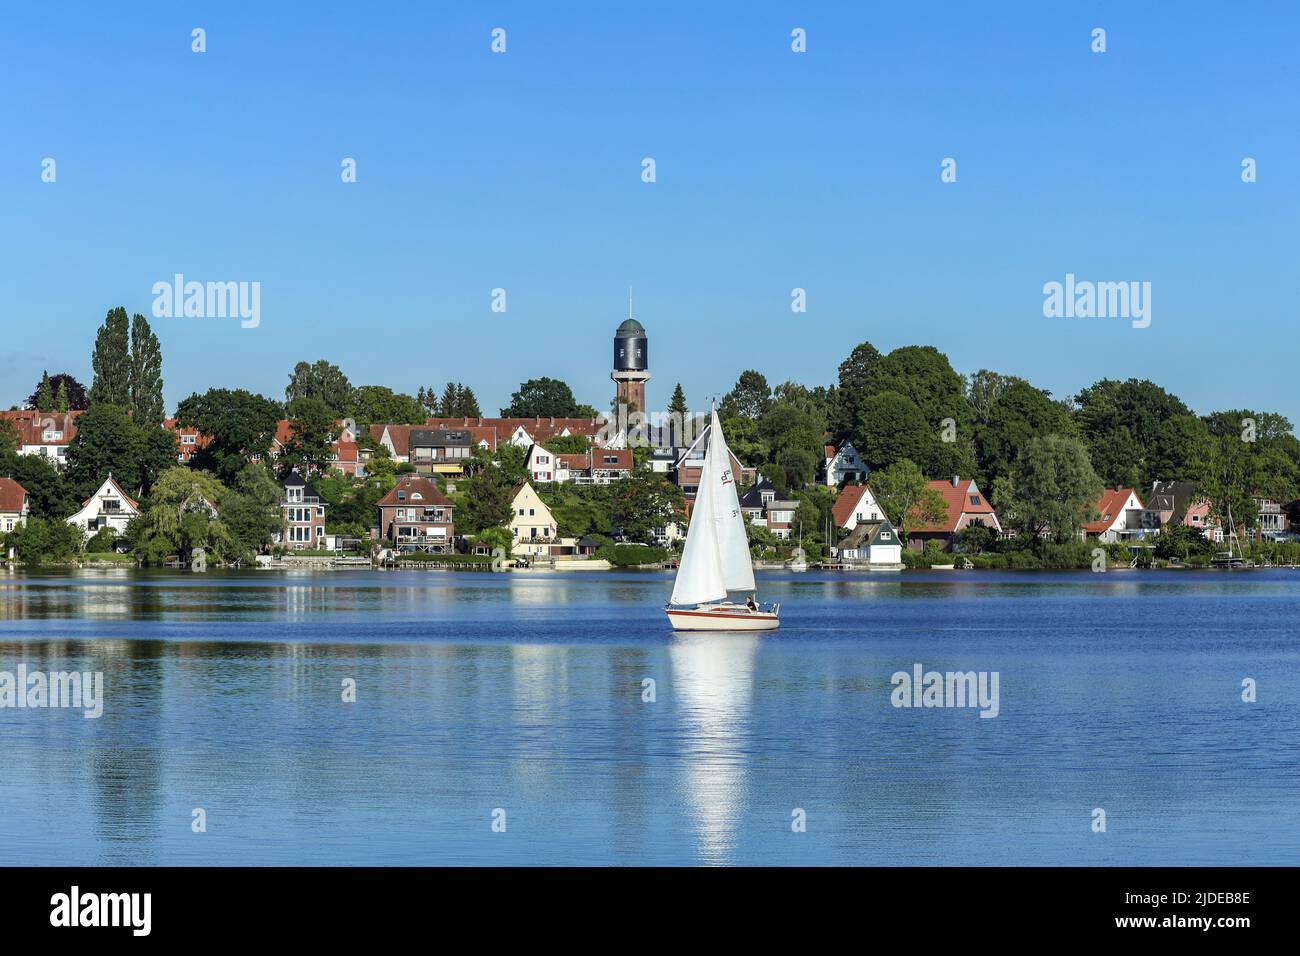 County town Plön, Northern Germany, from her romantic side with beautiful,fresh colors. Stock Photo